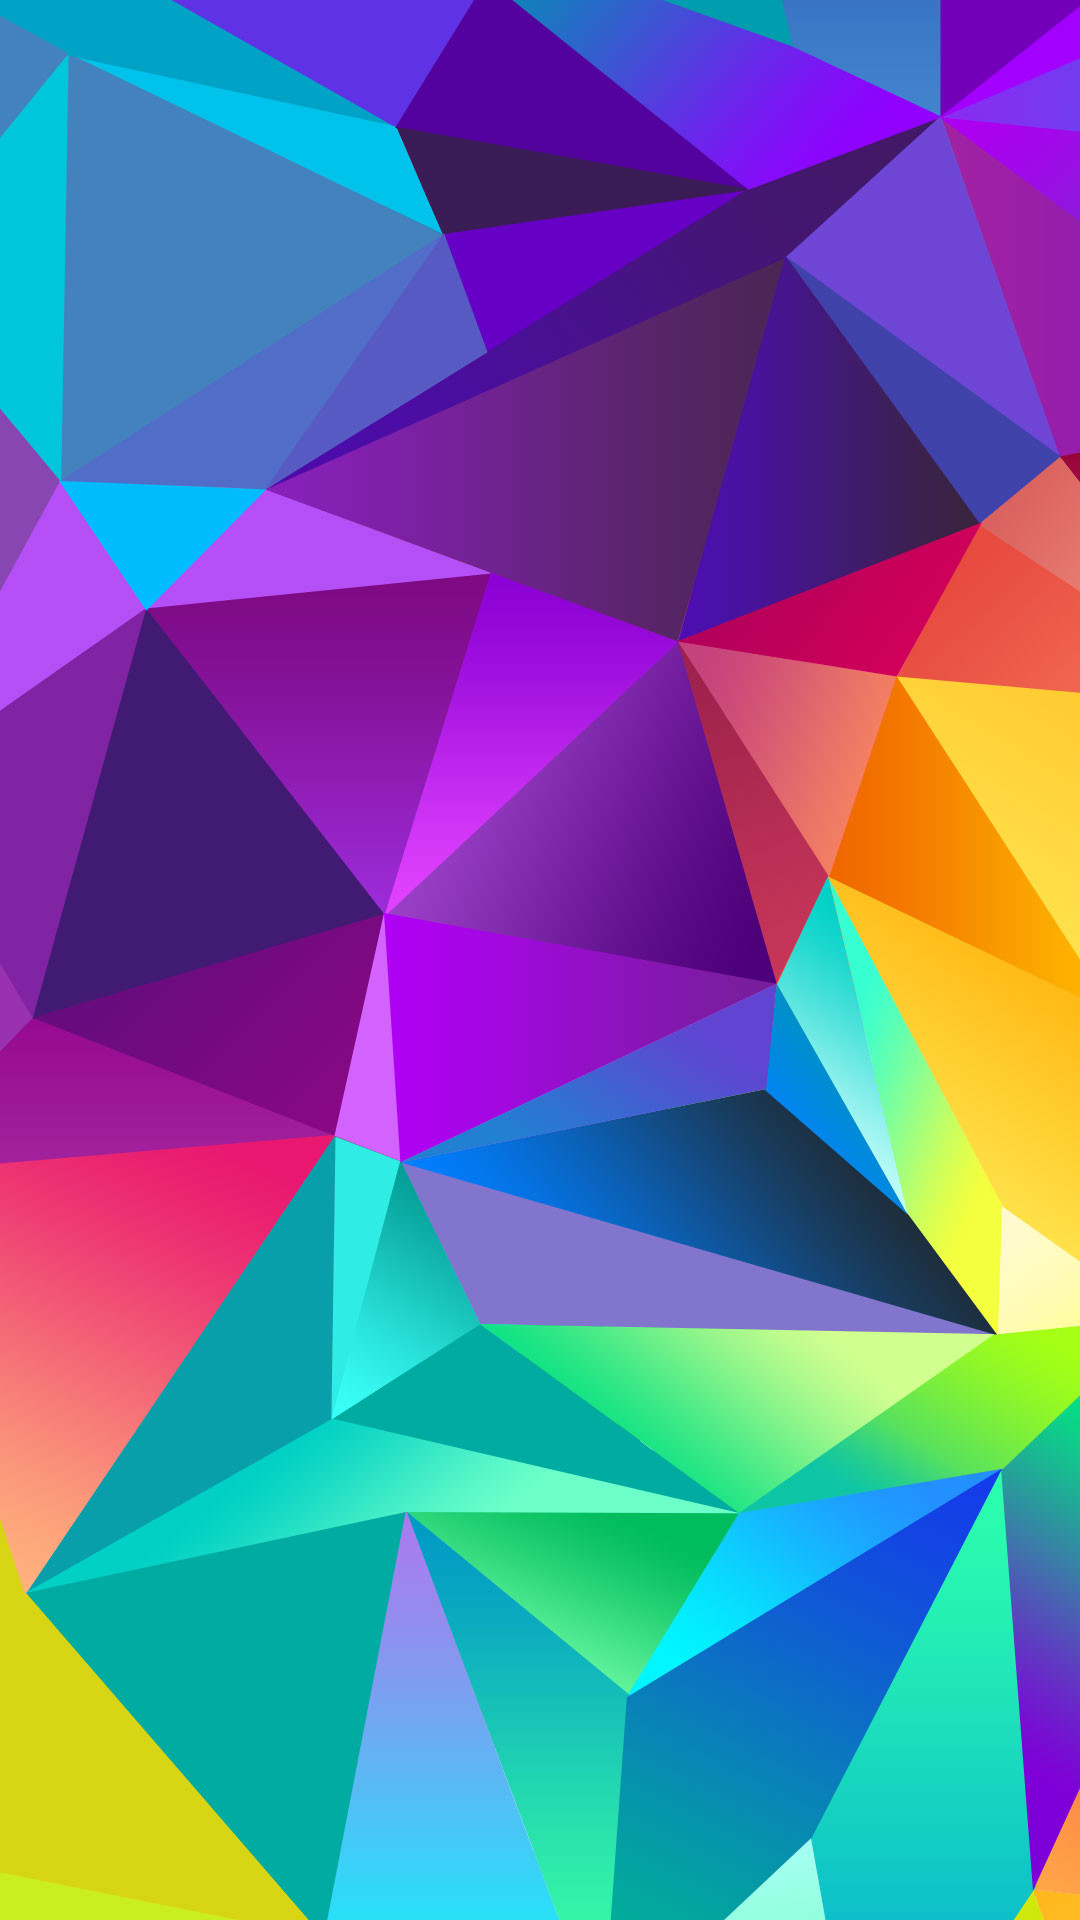 1080x1920 Colorful Polygon iPhone 6 Plus Wallpaper